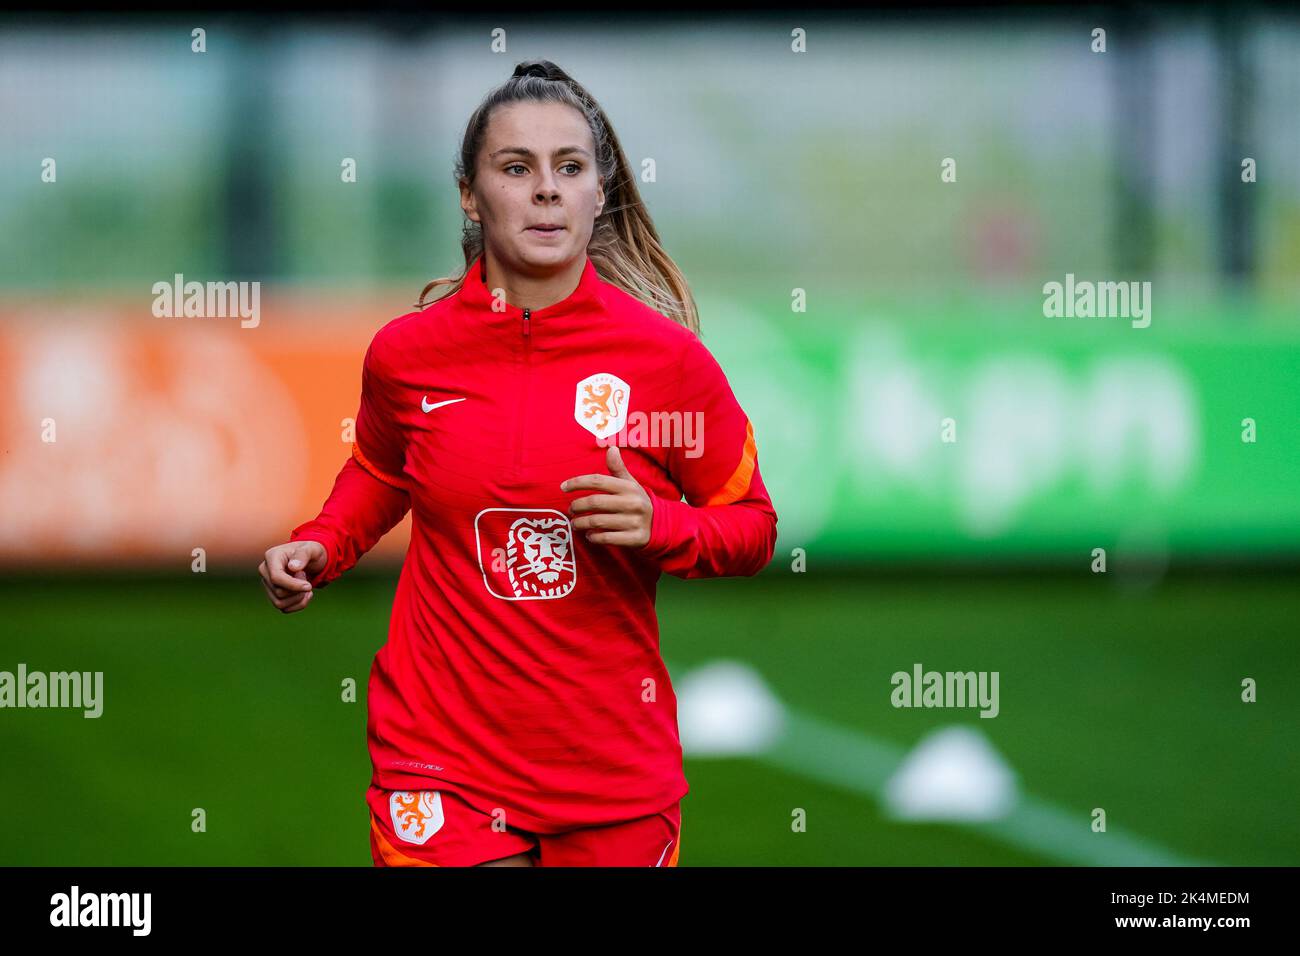 ZEIST, NETHERLANDS - OCTOBER 3: Victoria Pelova of the Netherlands during a Training Session of the Netherlands Women’s Football Team at the KNVB Campus on October 3, 2022 in Zeist, Netherlands (Photo by Joris Verwijst/Orange Pictures) Stock Photo